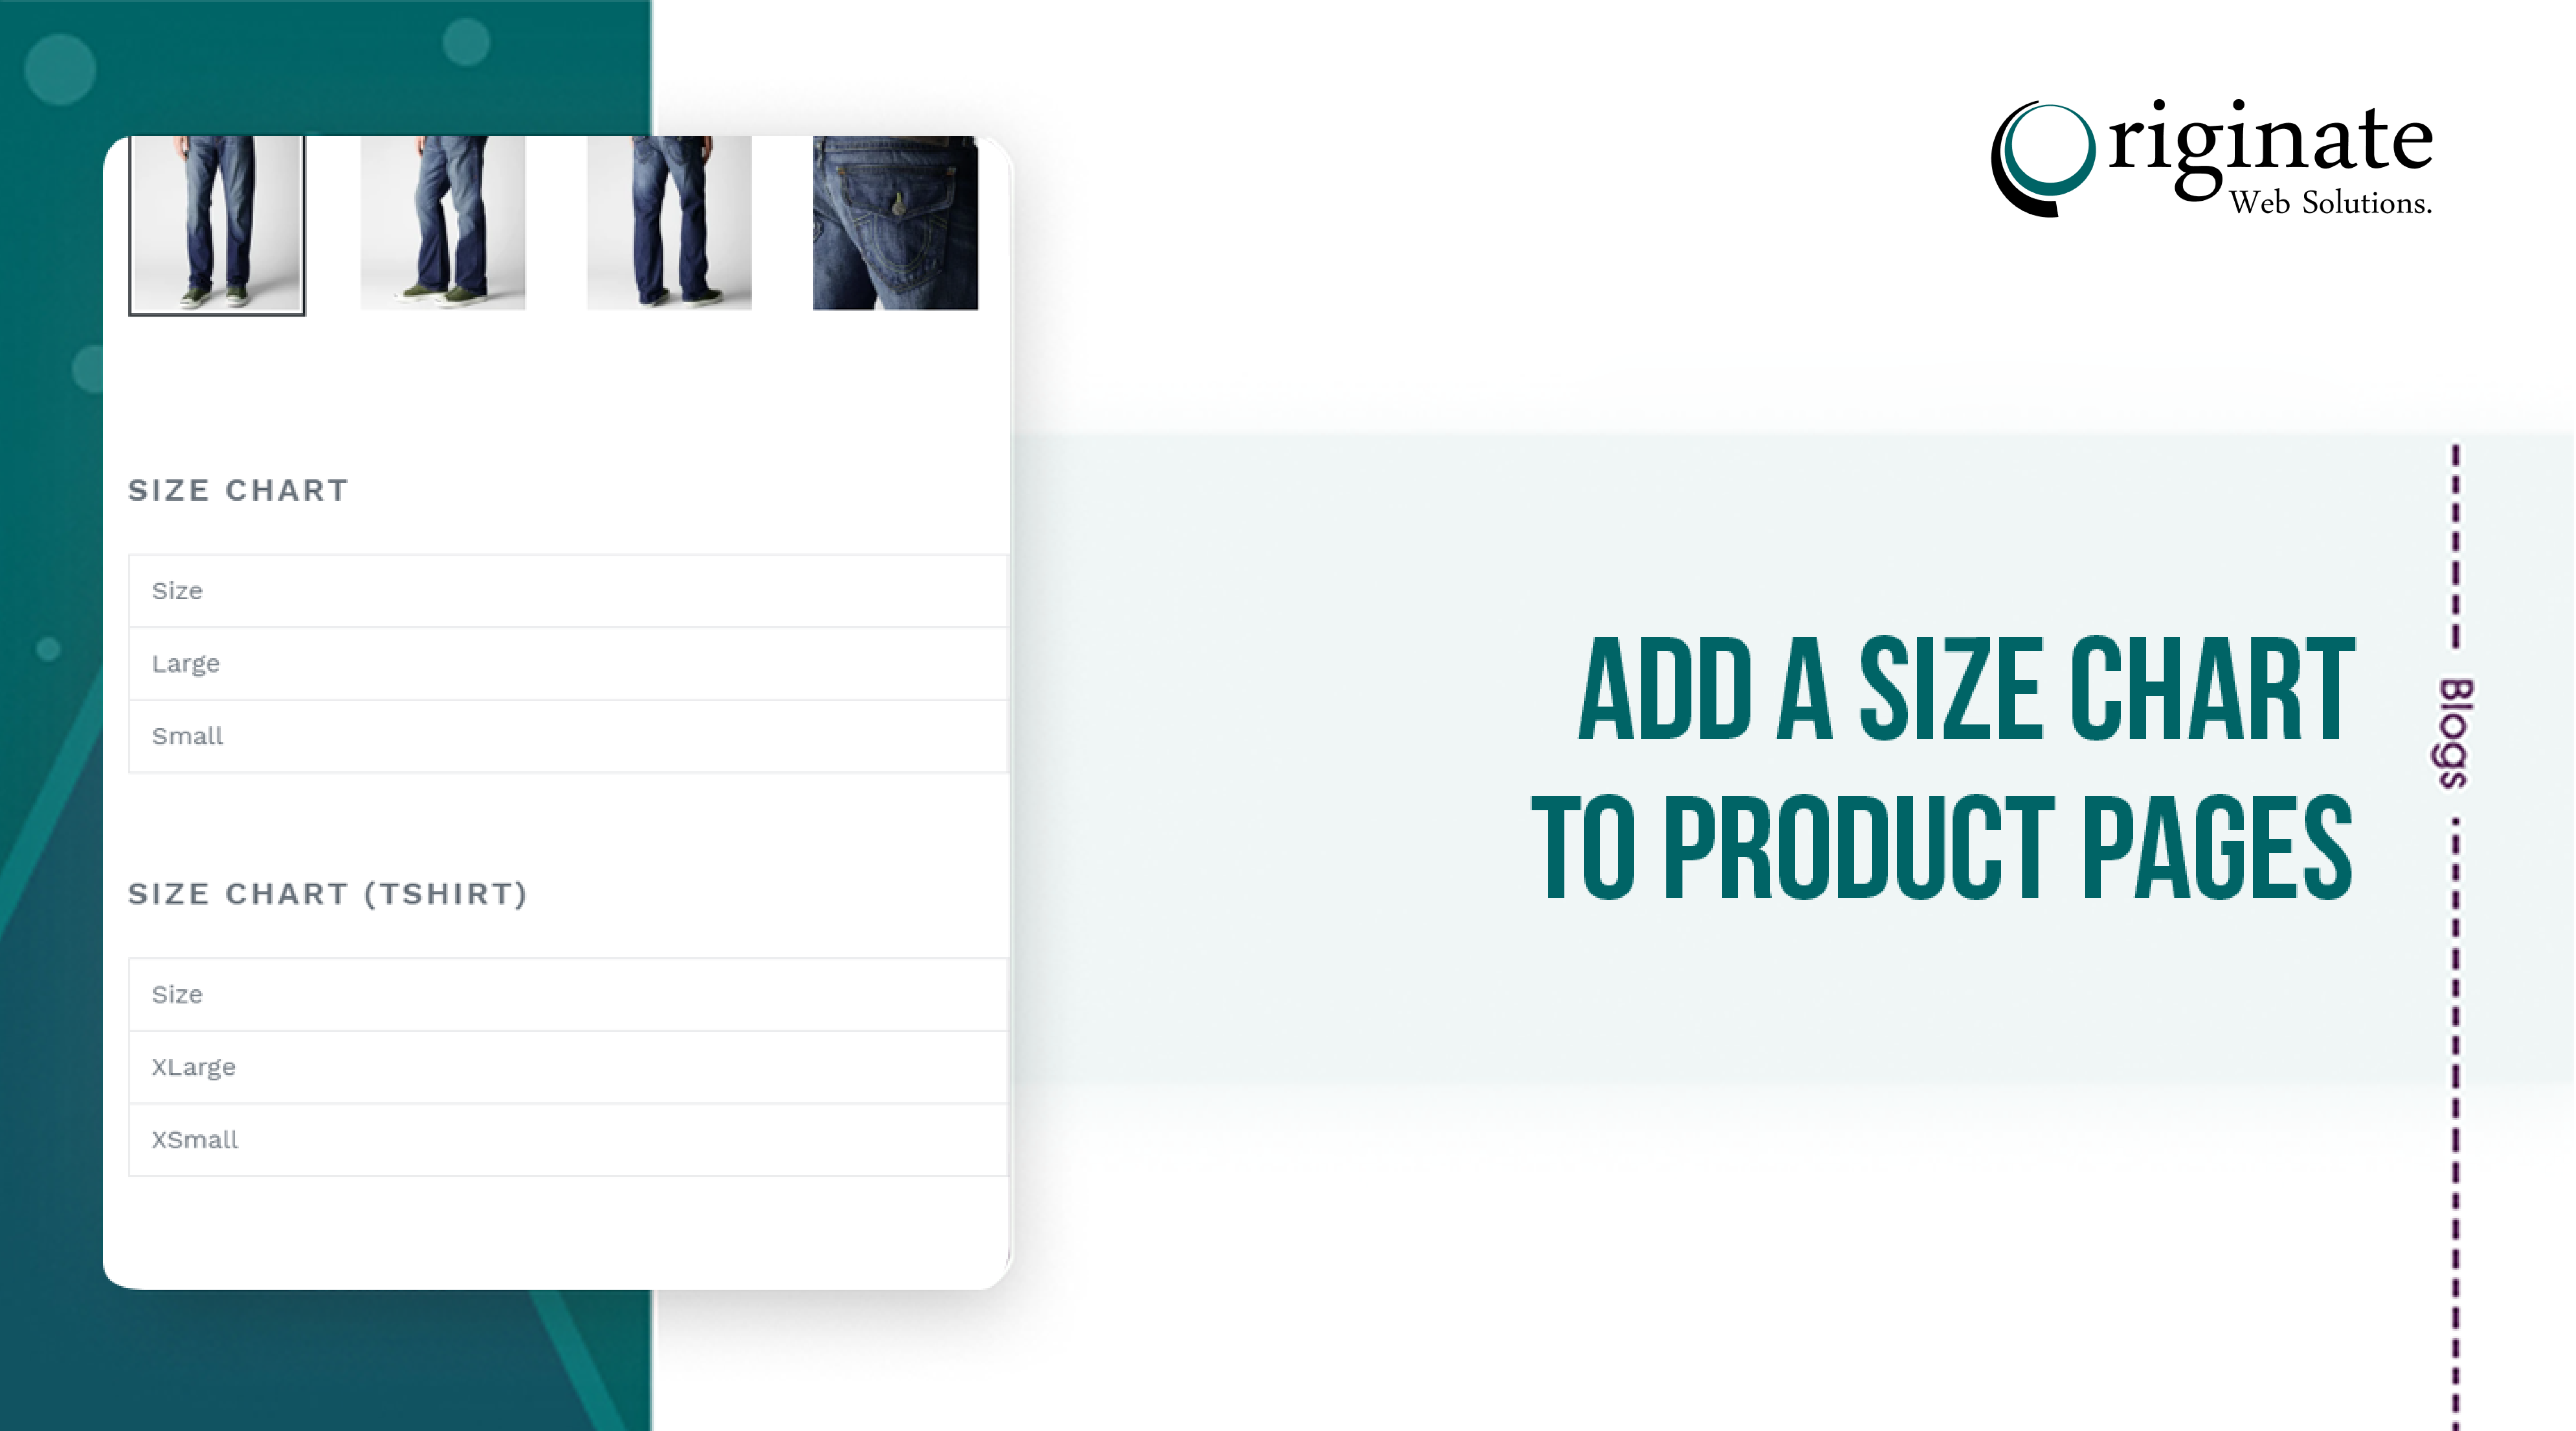 Add a size chart to product pages